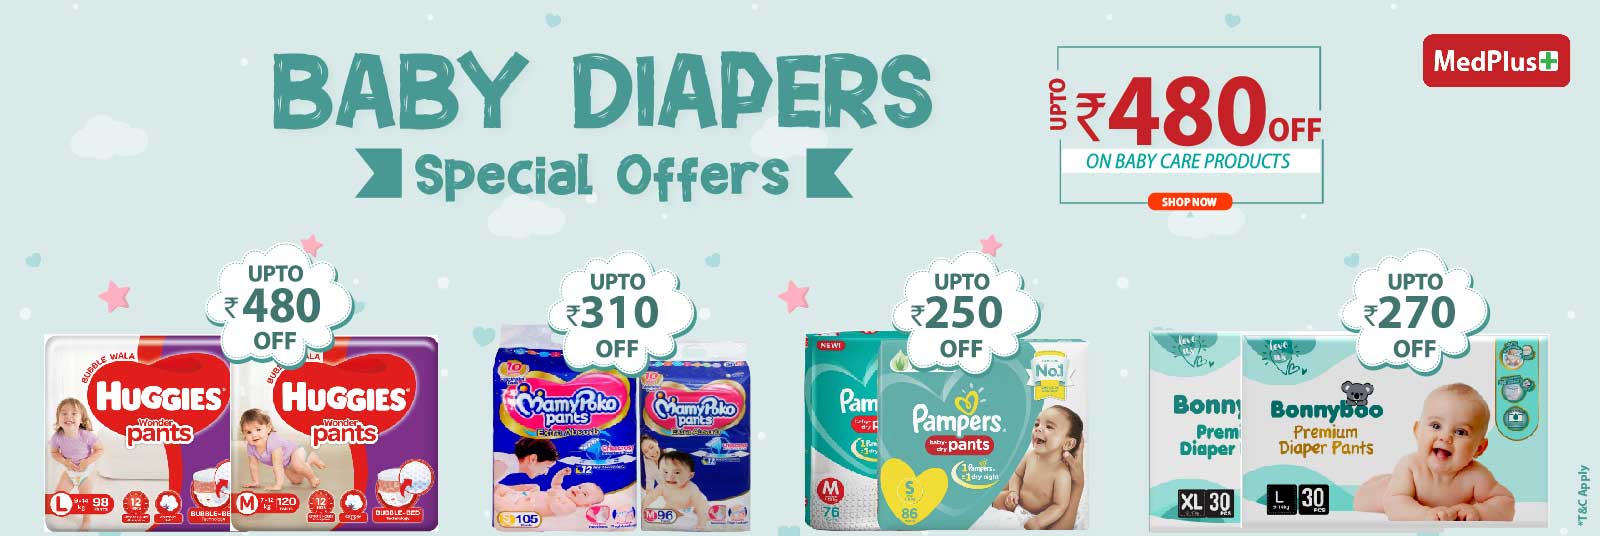 Baby Diapers Upto Rs 480 Off